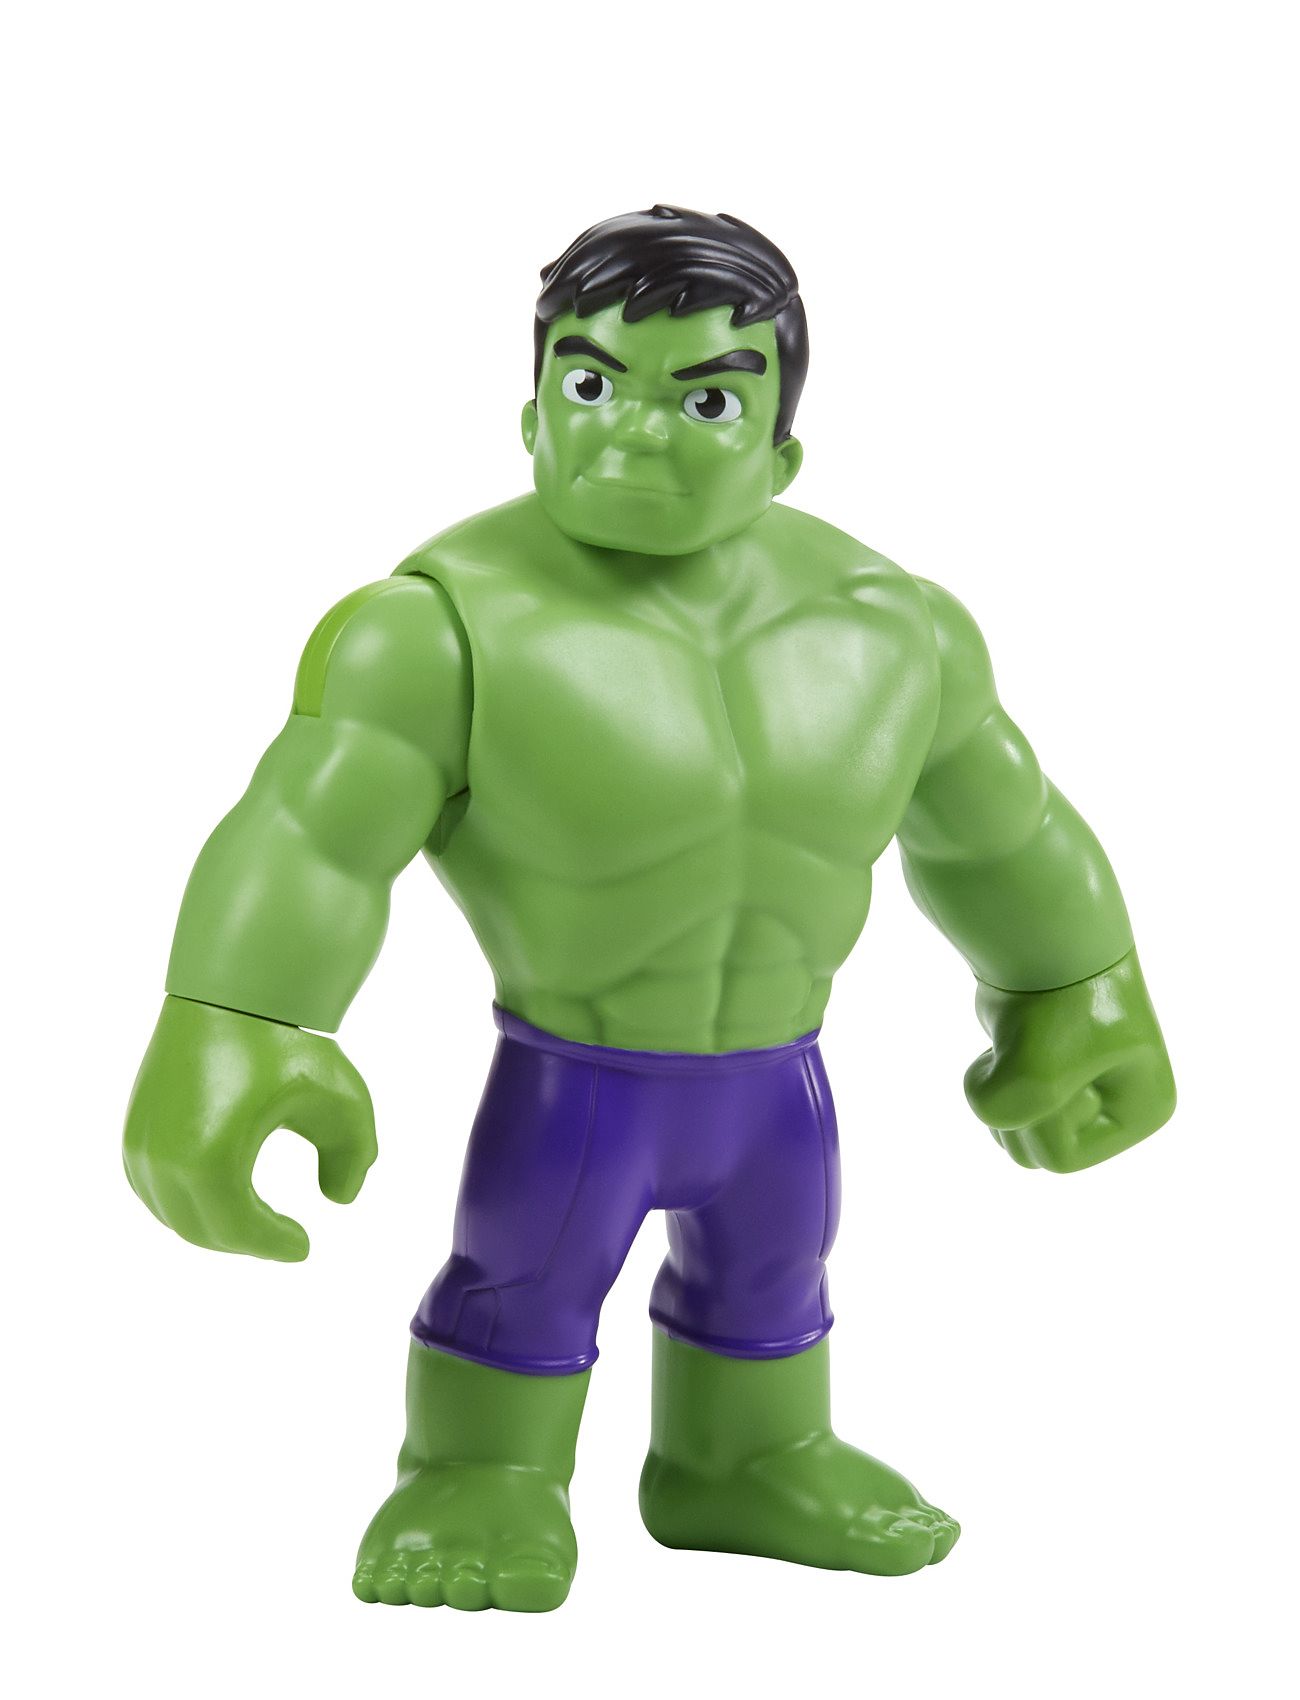 Marvel Spidey And His Amazing Friends Super D Hulk Action Figure, Preschool Toy, Age 3 And Up Toys Playsets & Action Figures Action Figures Multi/patterned Marvel